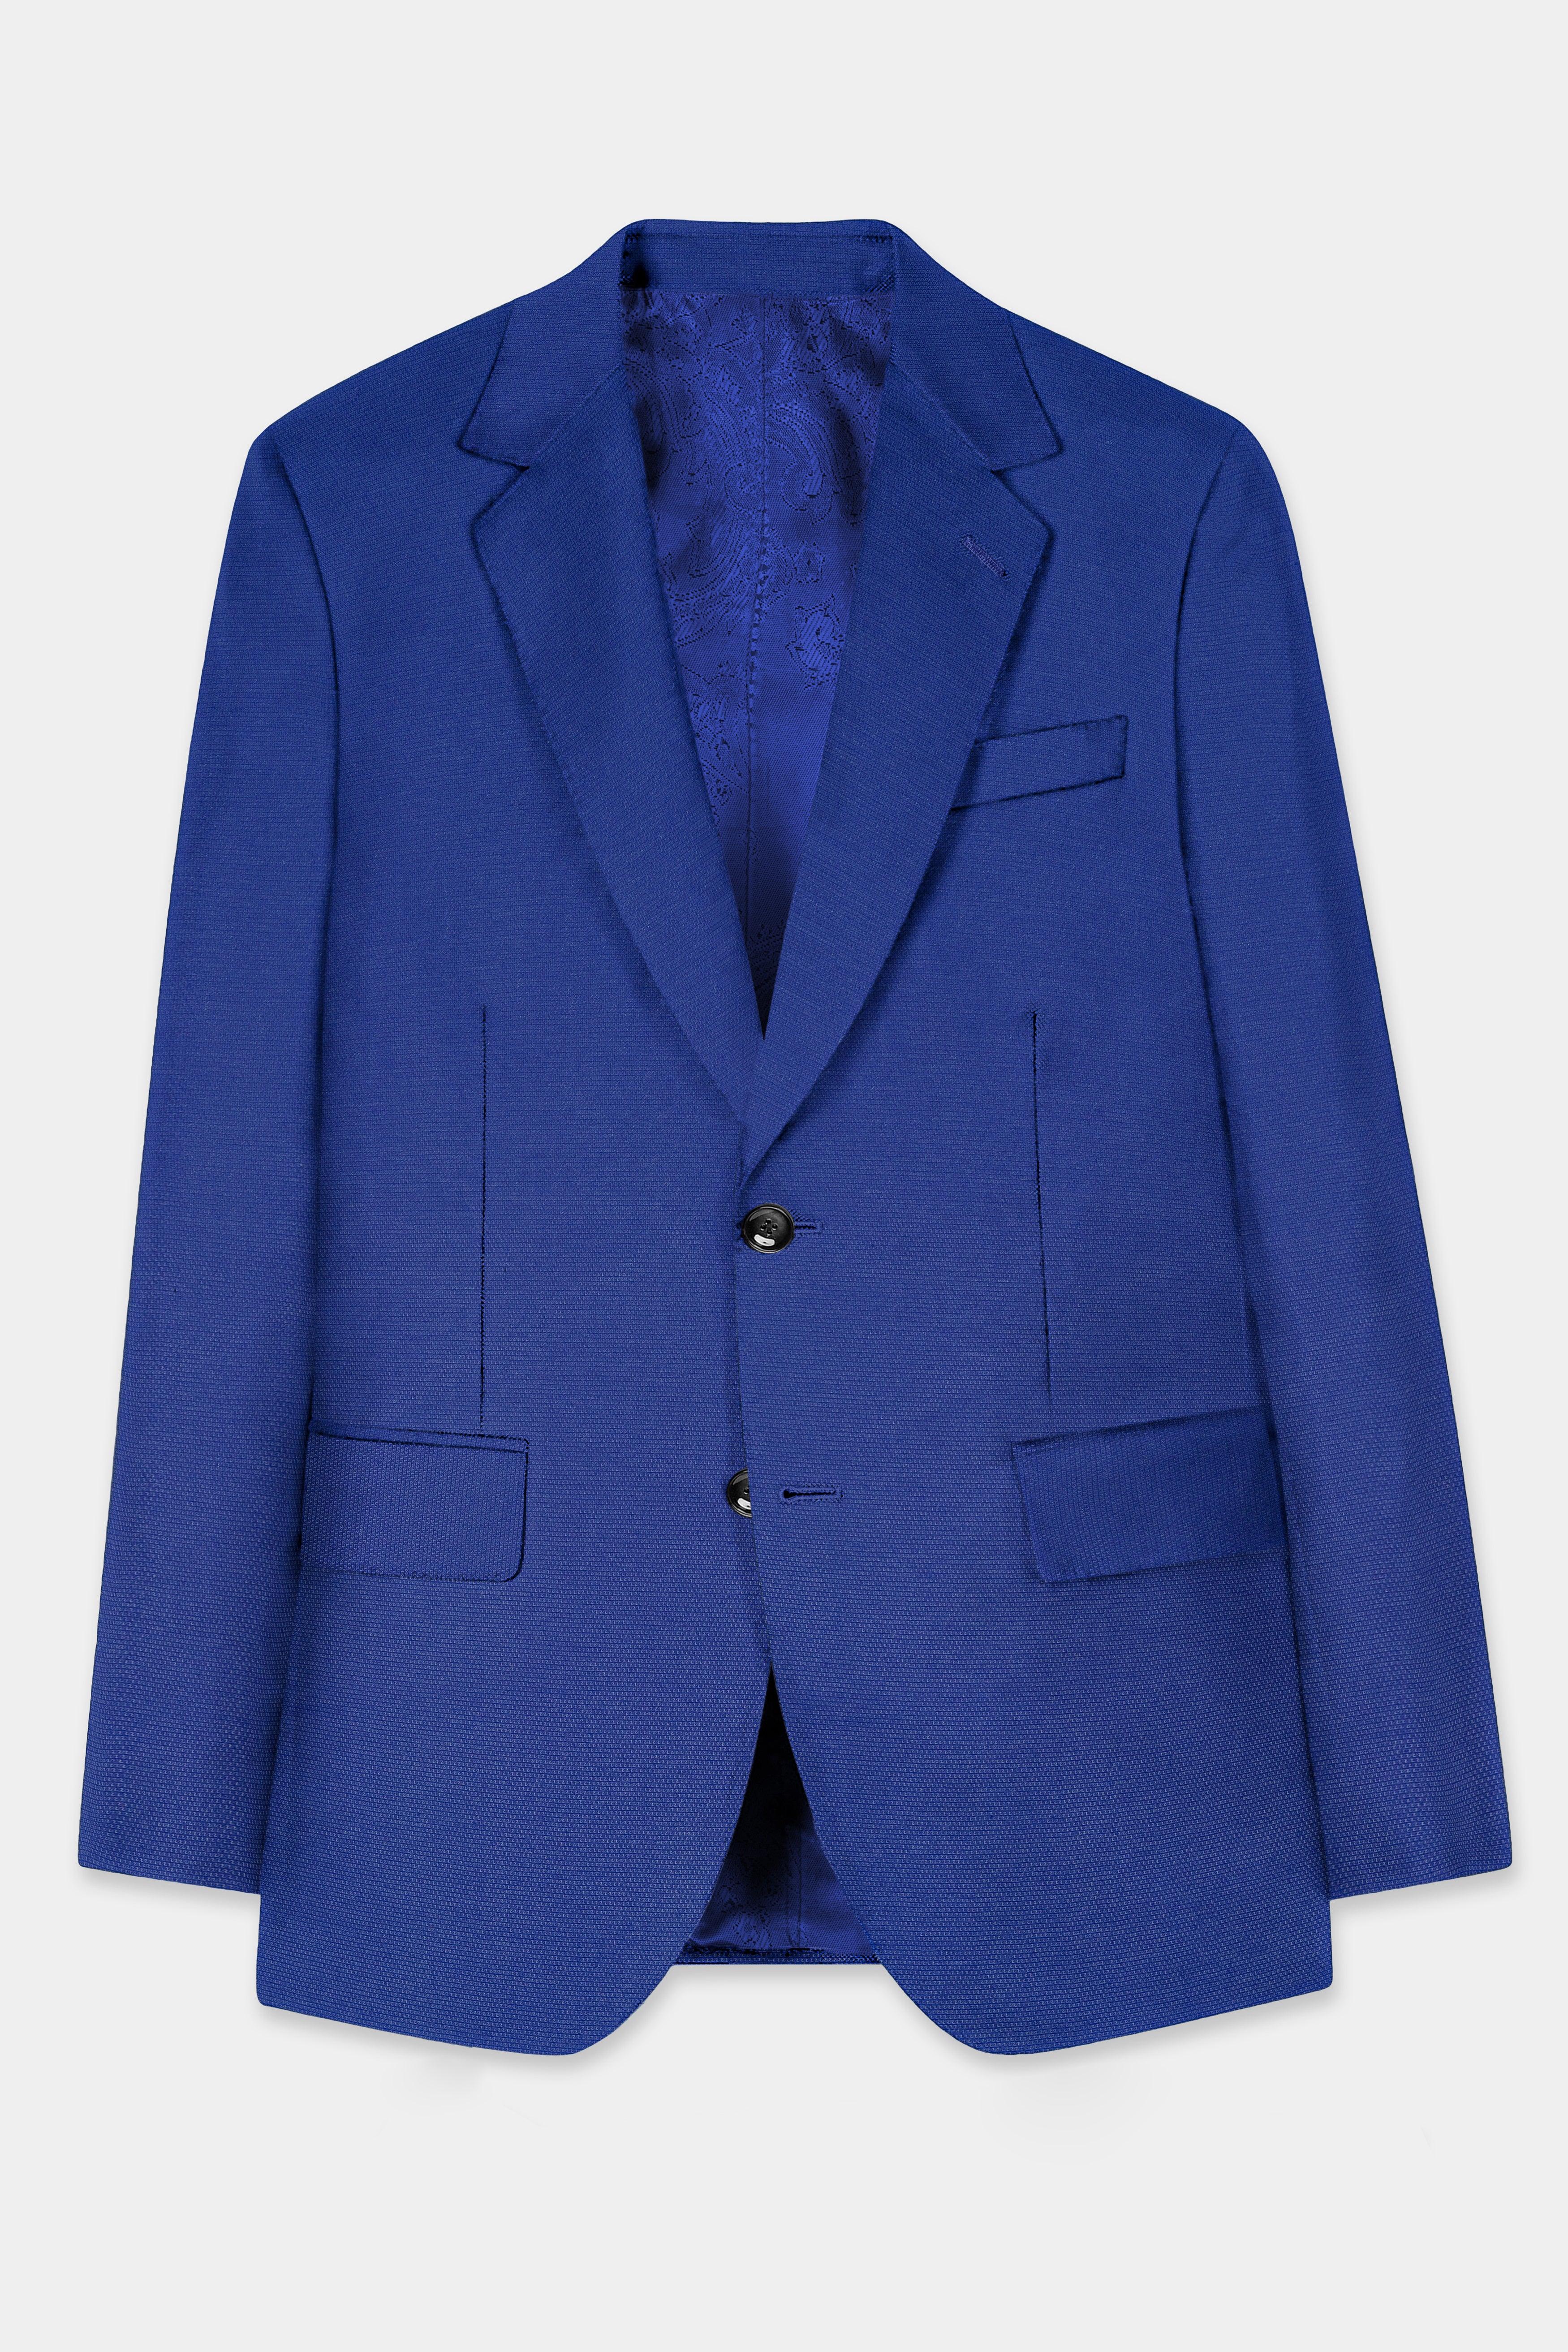 Catalina Blue Dobby Textured Wool Blend Suit